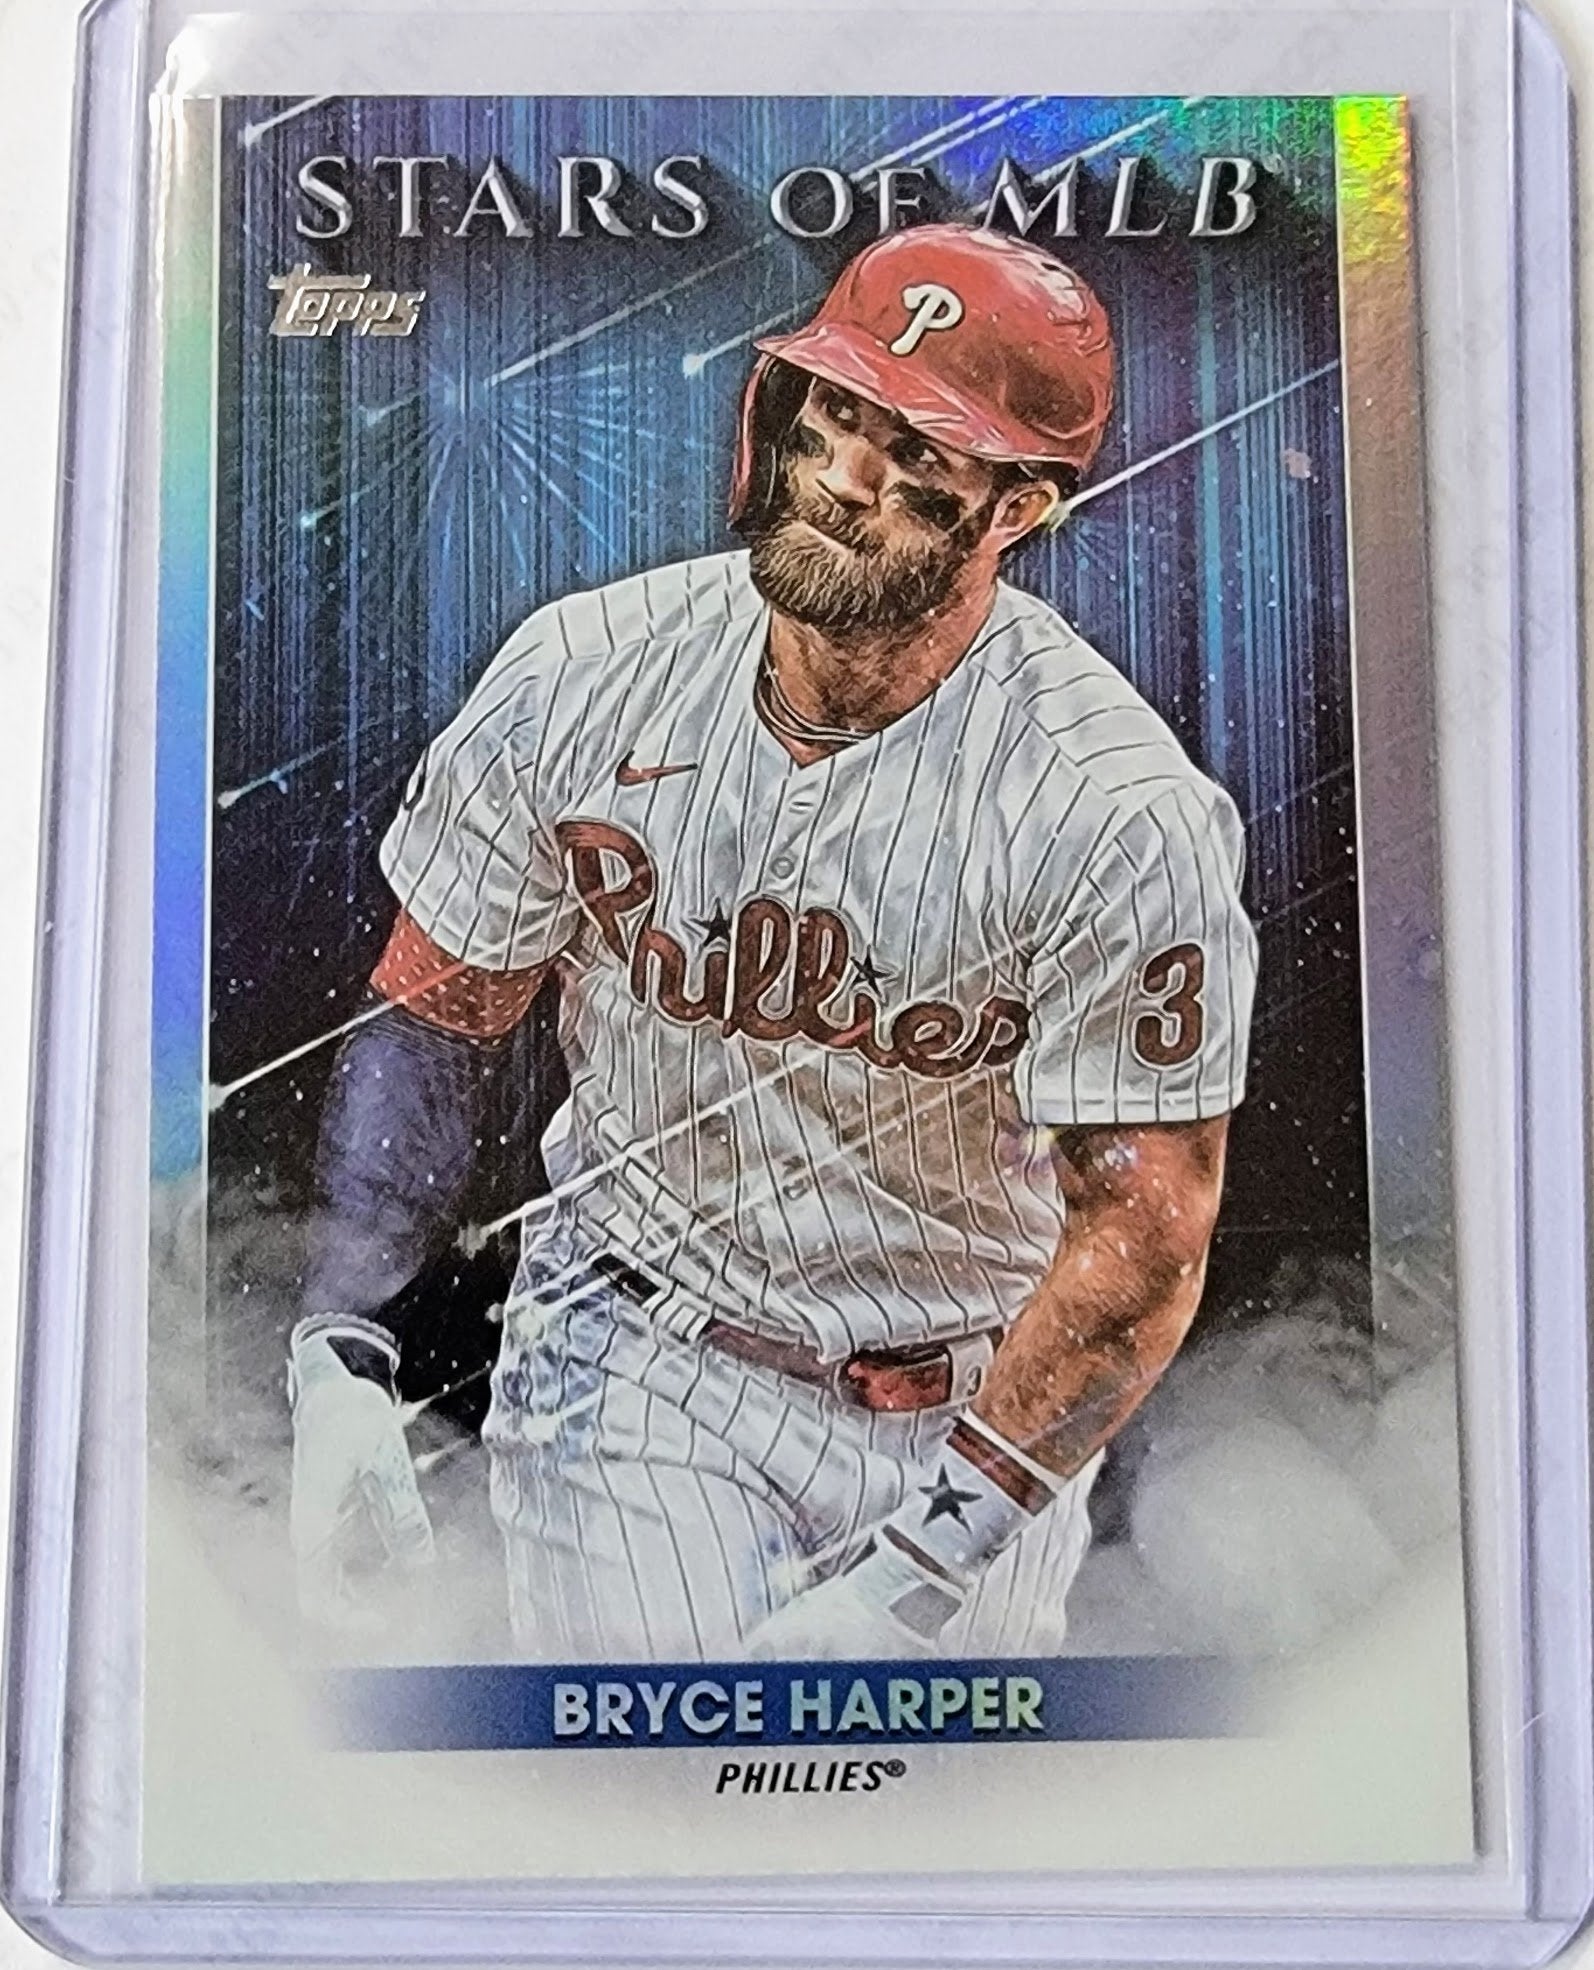 2022 Topps Bryce Harper Stars of the MLB Baseball Trading Card GRB1 simple Xclusive Collectibles   